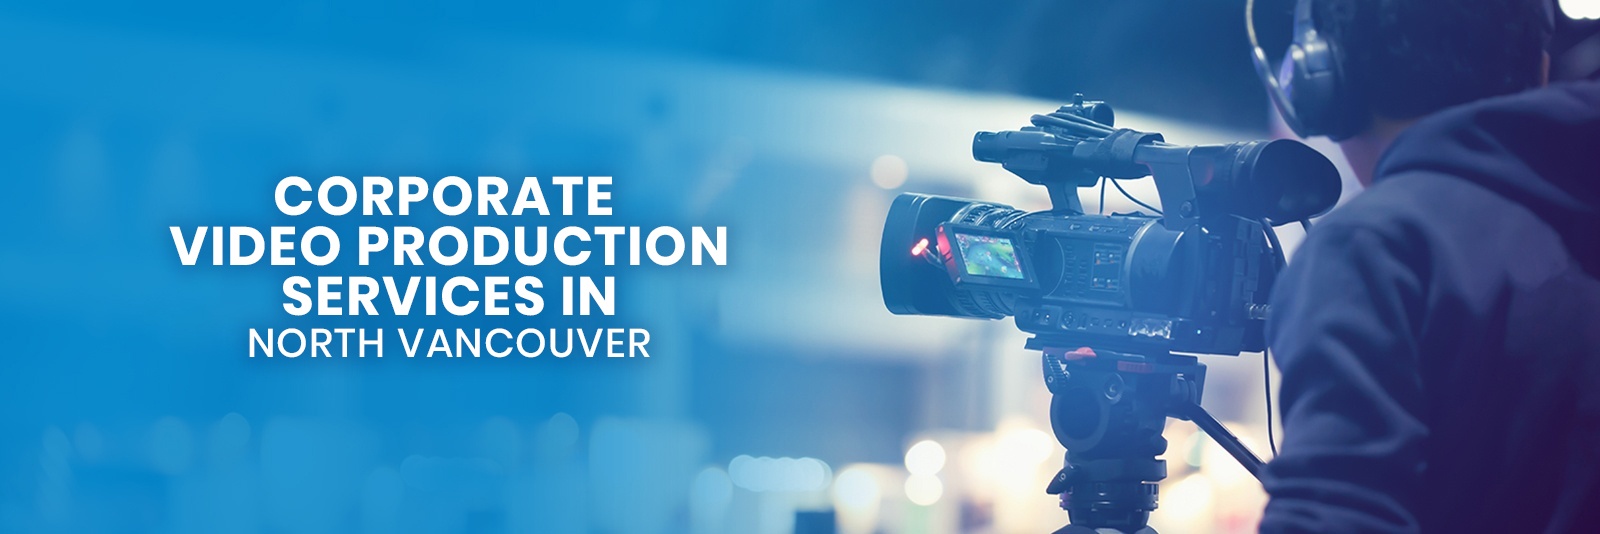 Video Production Services In North Vancouver